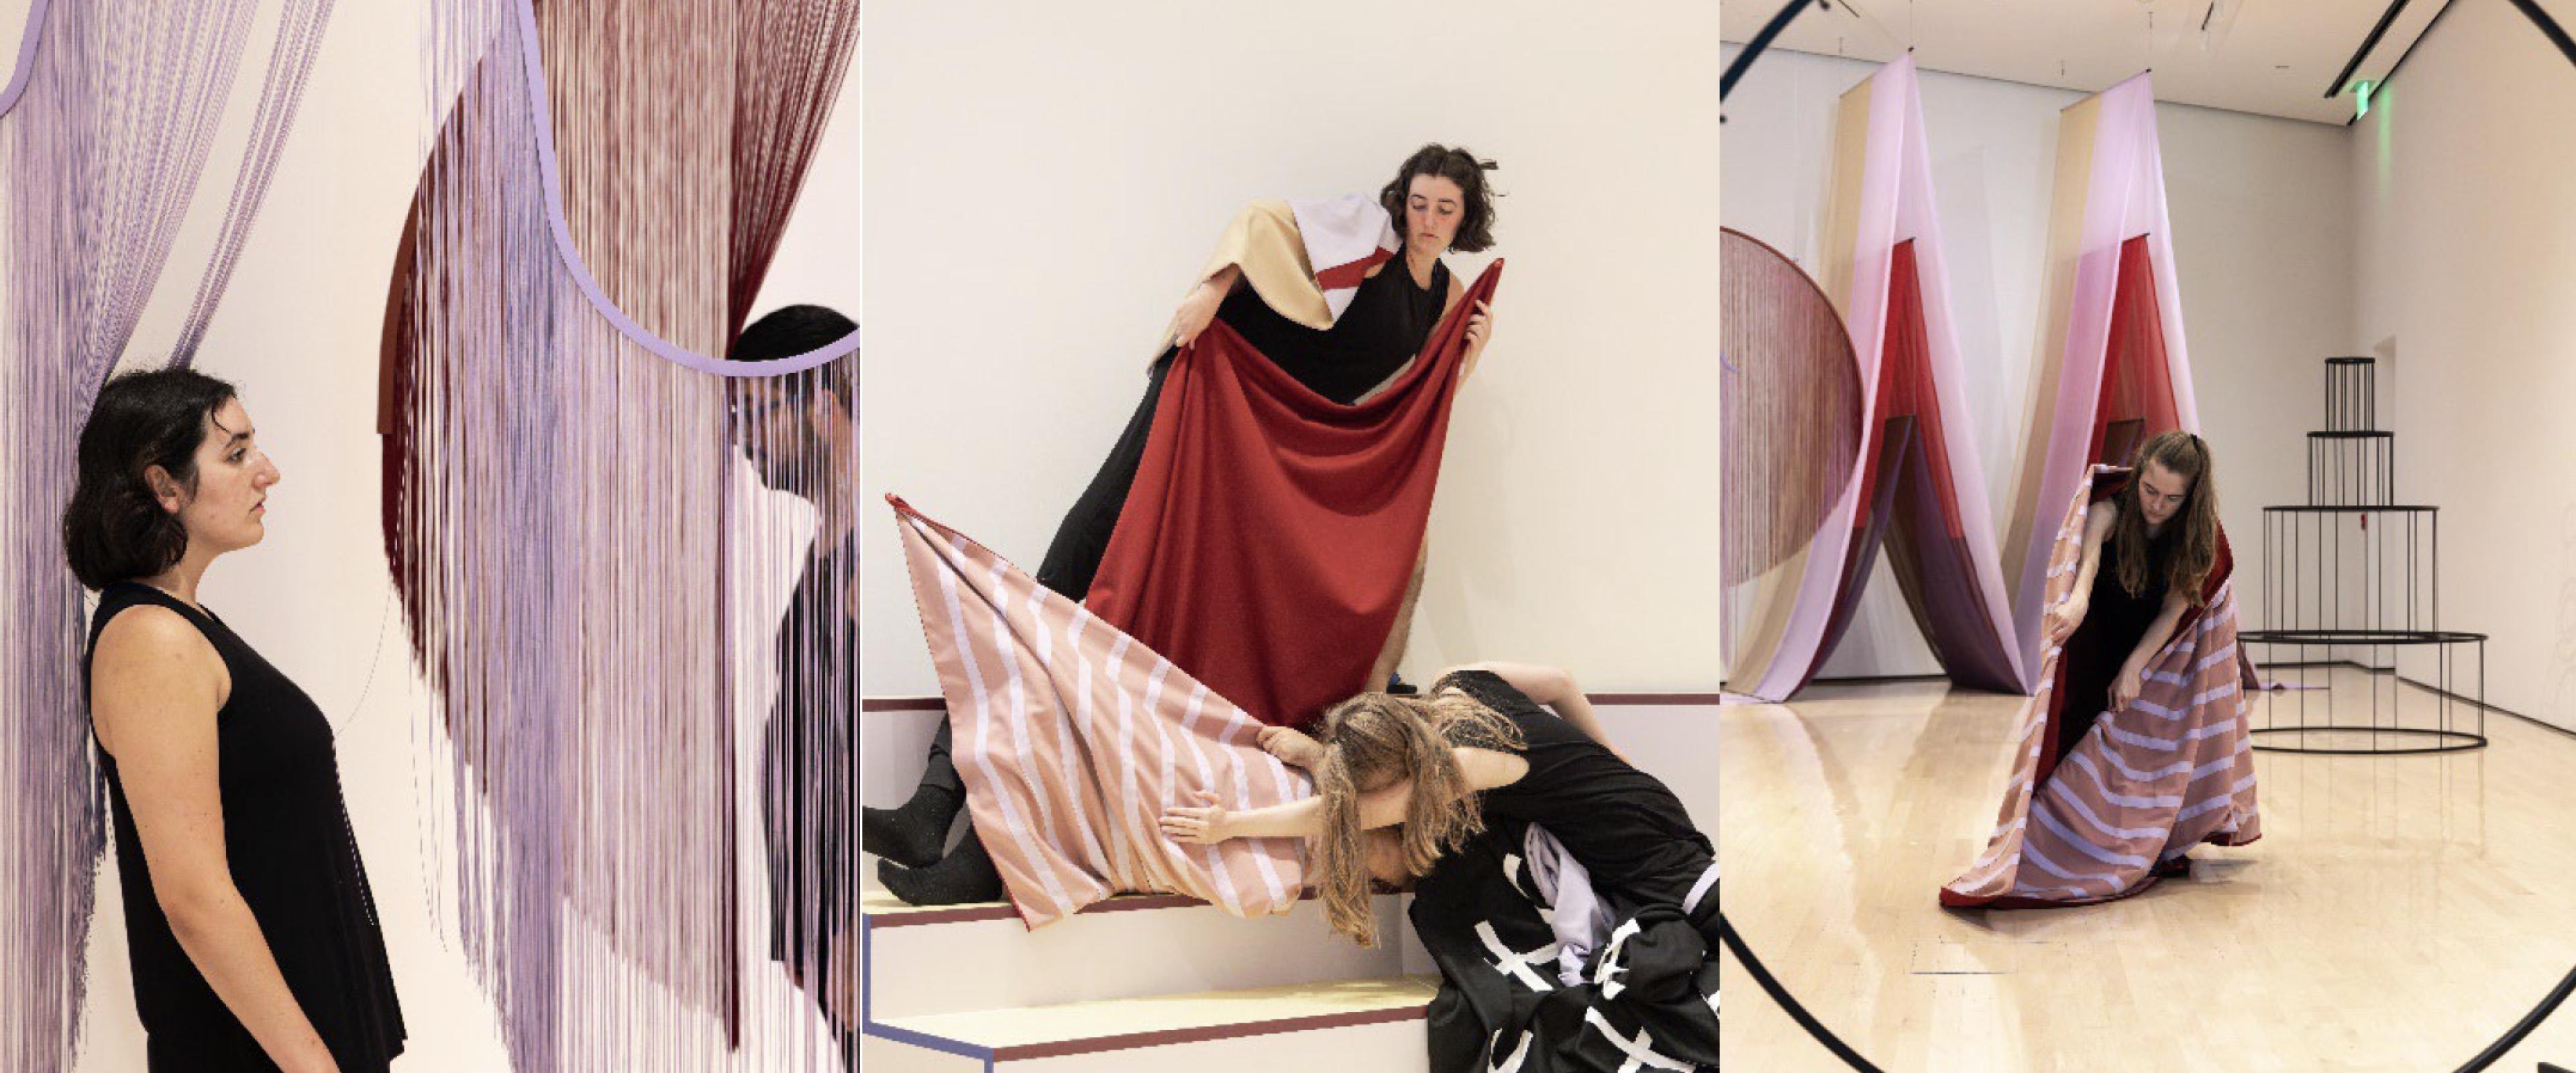 3 shots of performers in the Andrea Canepa exhibition